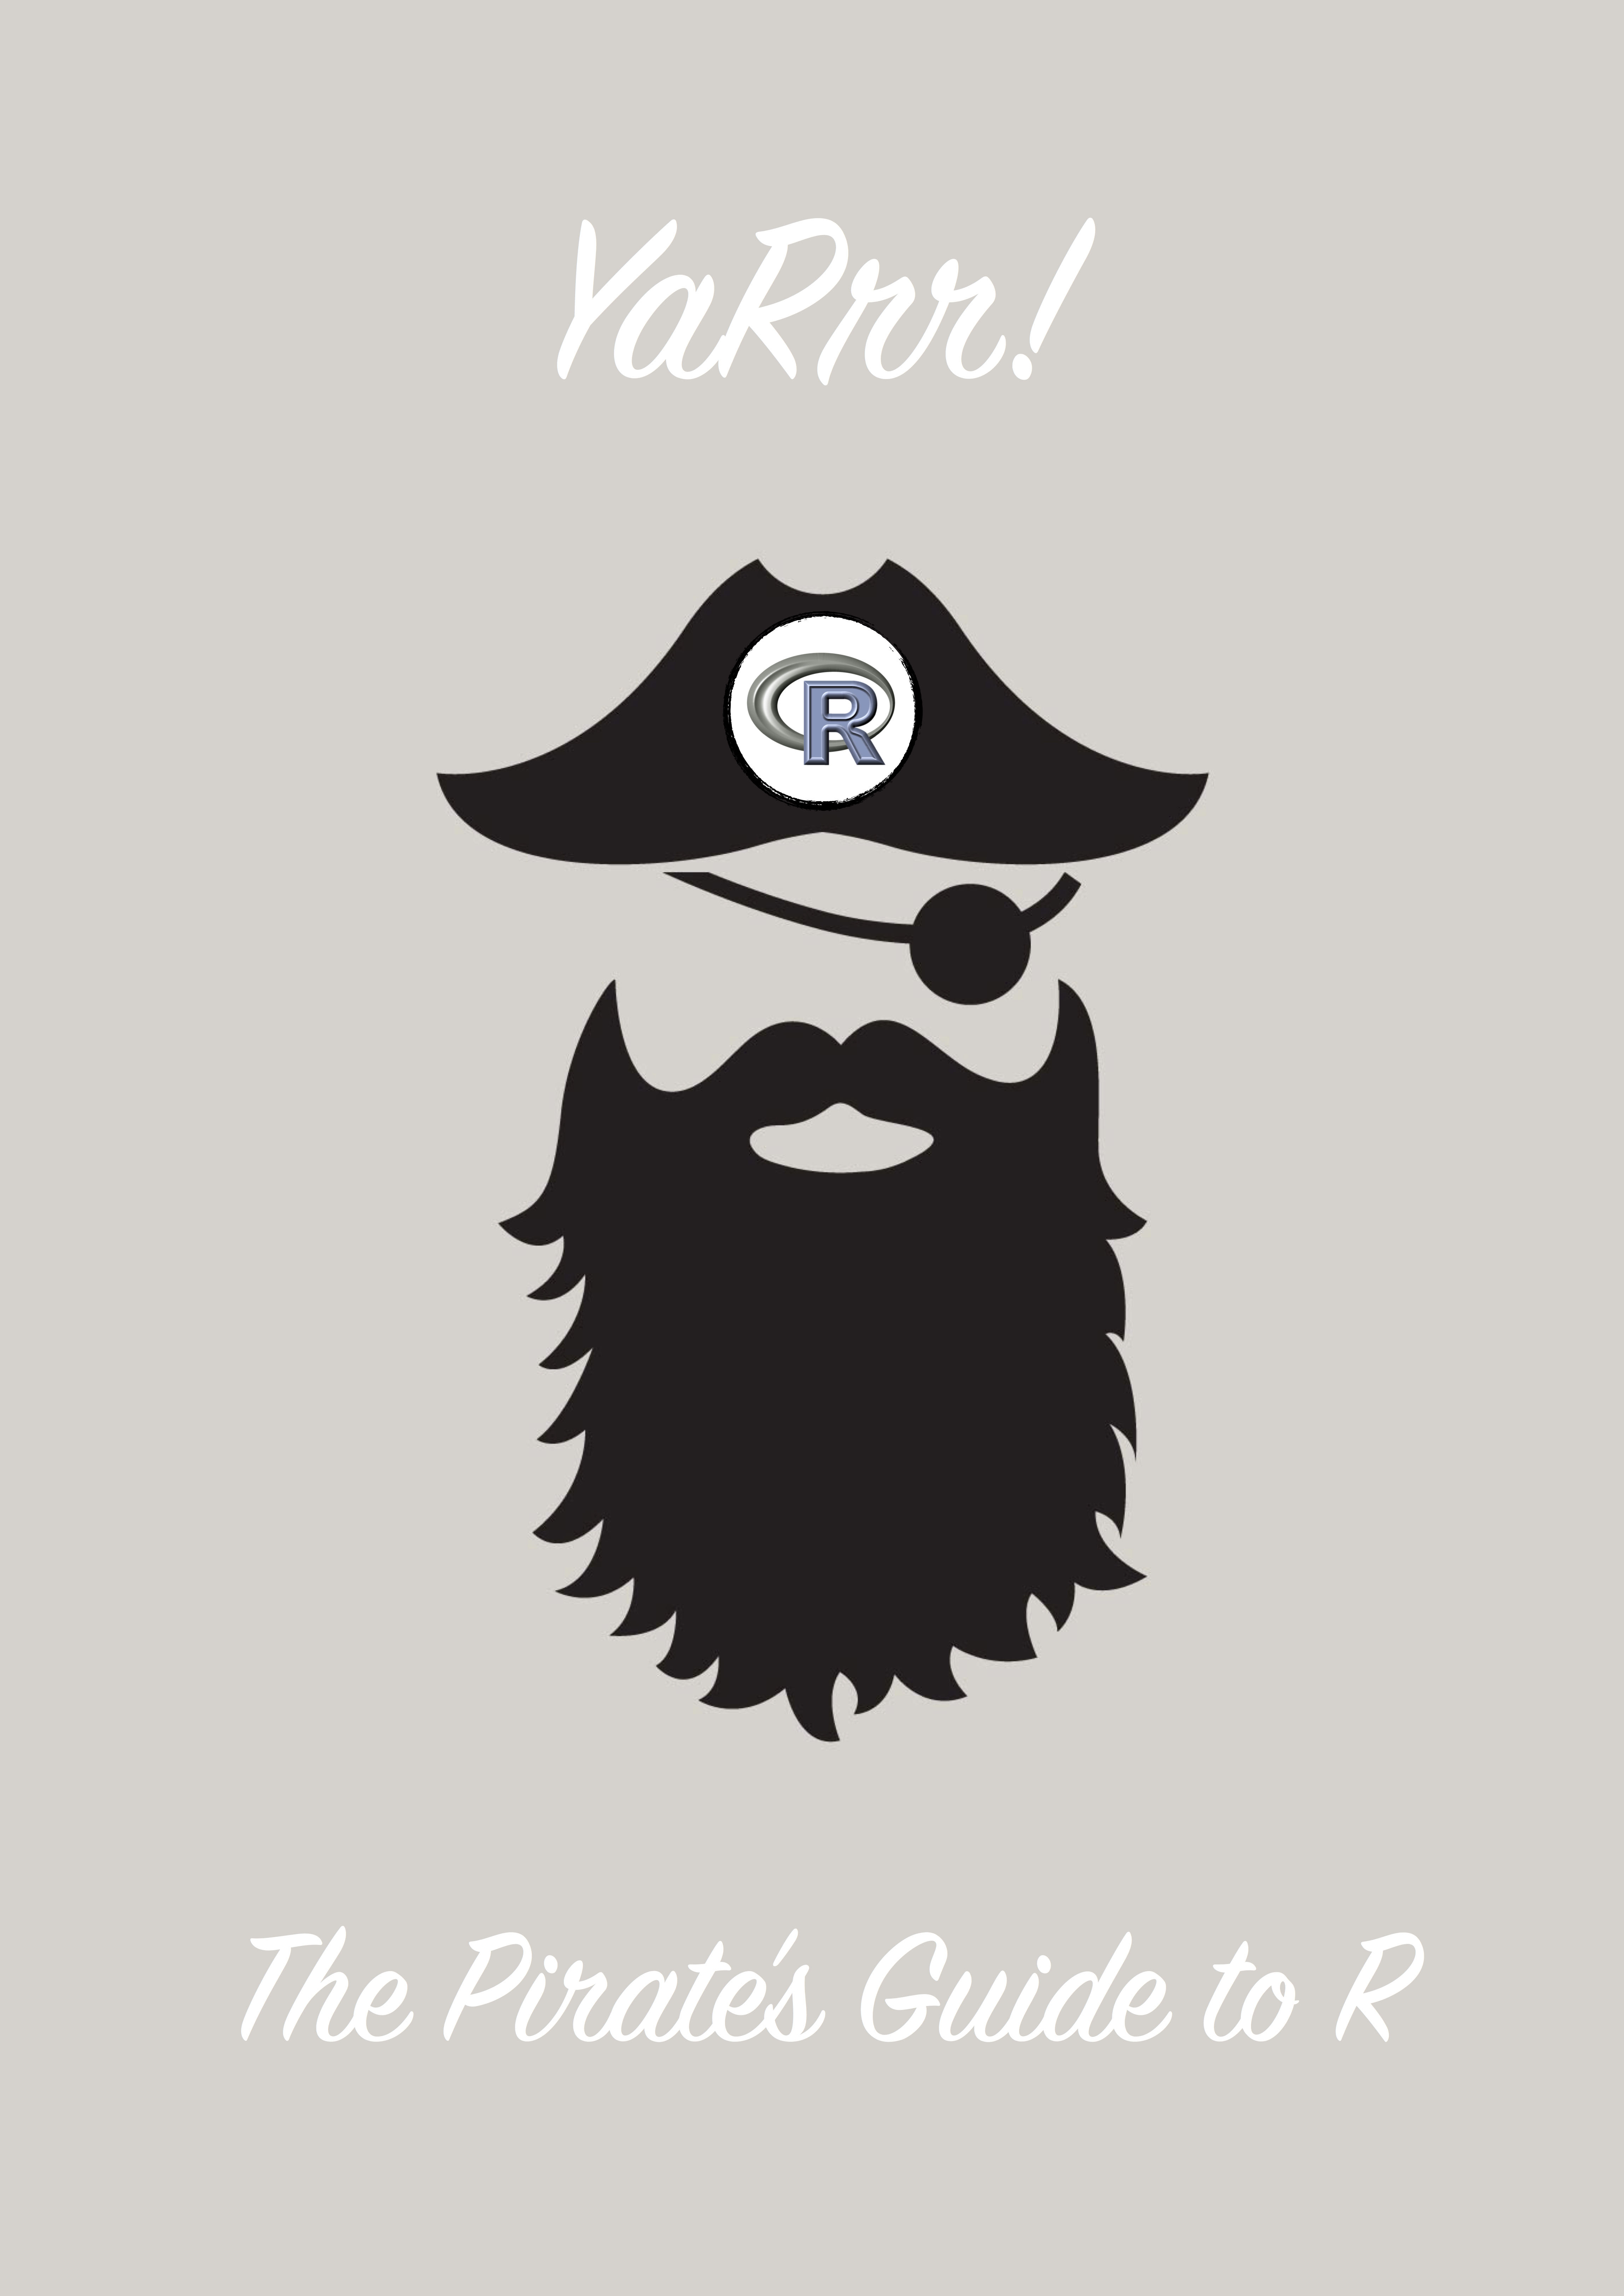 YaRrr! The Pirate’s Guide to R